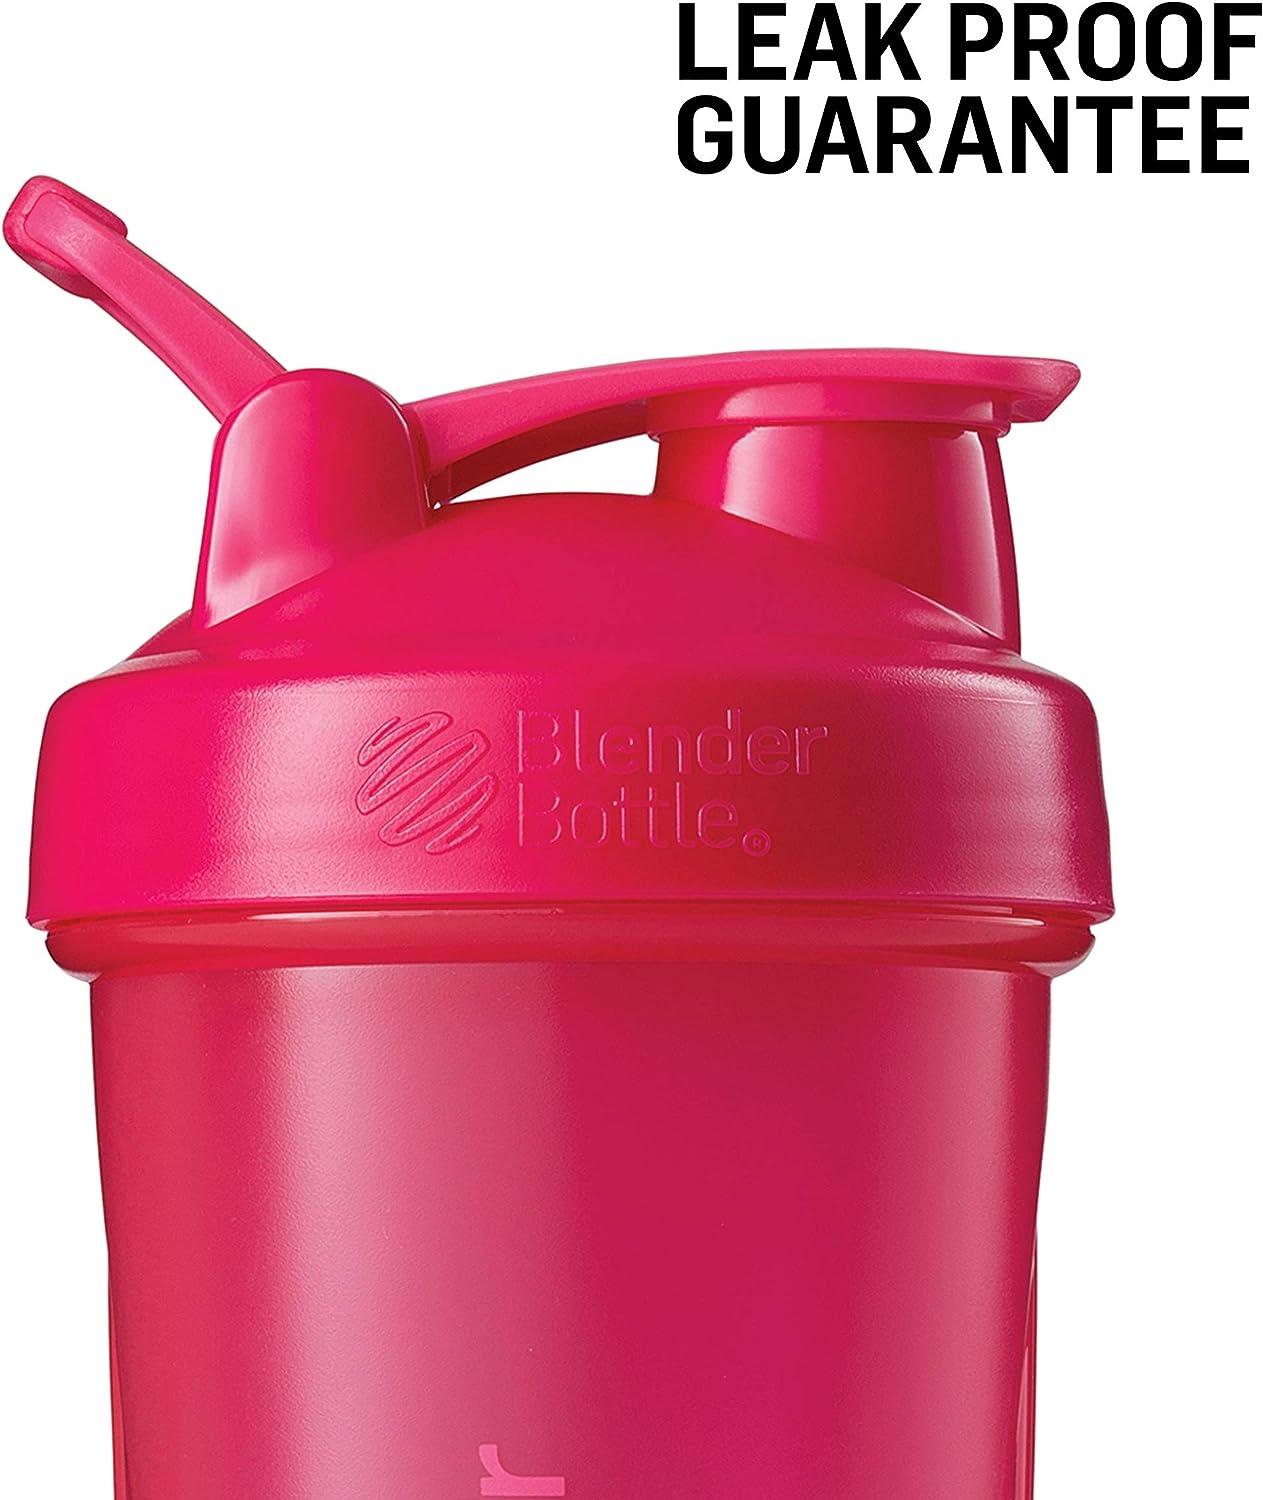 Protein Shaker Bottle Classic Blender Mixer Cup with Loop Top